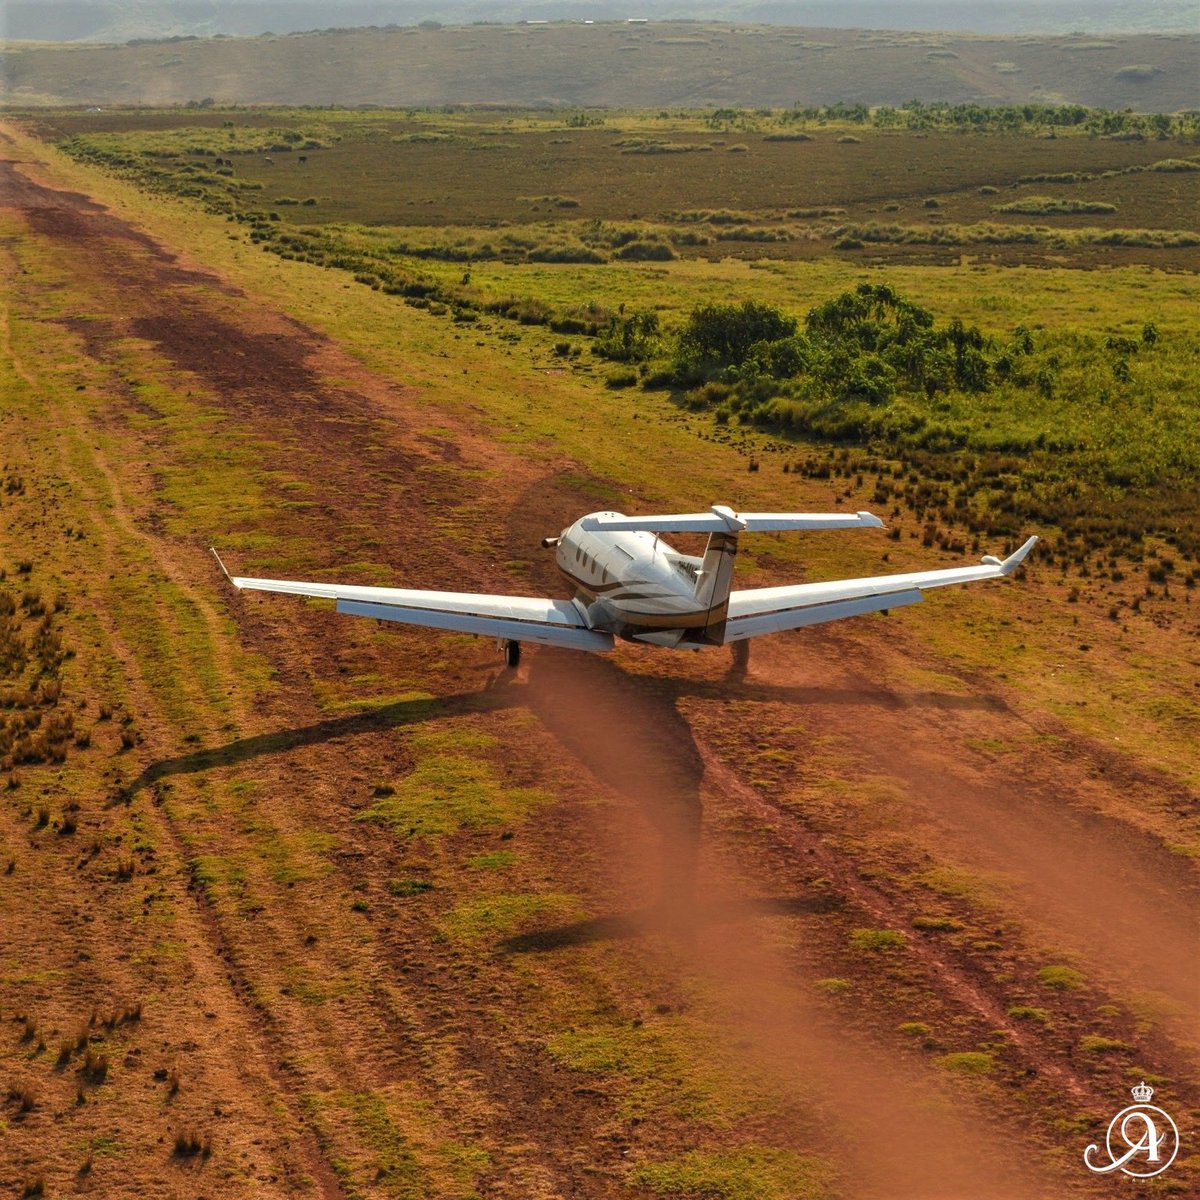 We take you in the African bush in the best conditions ever ! 🛩🌍✨

#pilatusc12  #privatejet  #privatejets  #jet #dreamjet #luxuryjet #tanzanie #africa #privatejetlife #luxuryaviation #VIP  #artoftravel #luxurytravel #safari  #africa  #tanzania #bigfive  #tomakethedifference